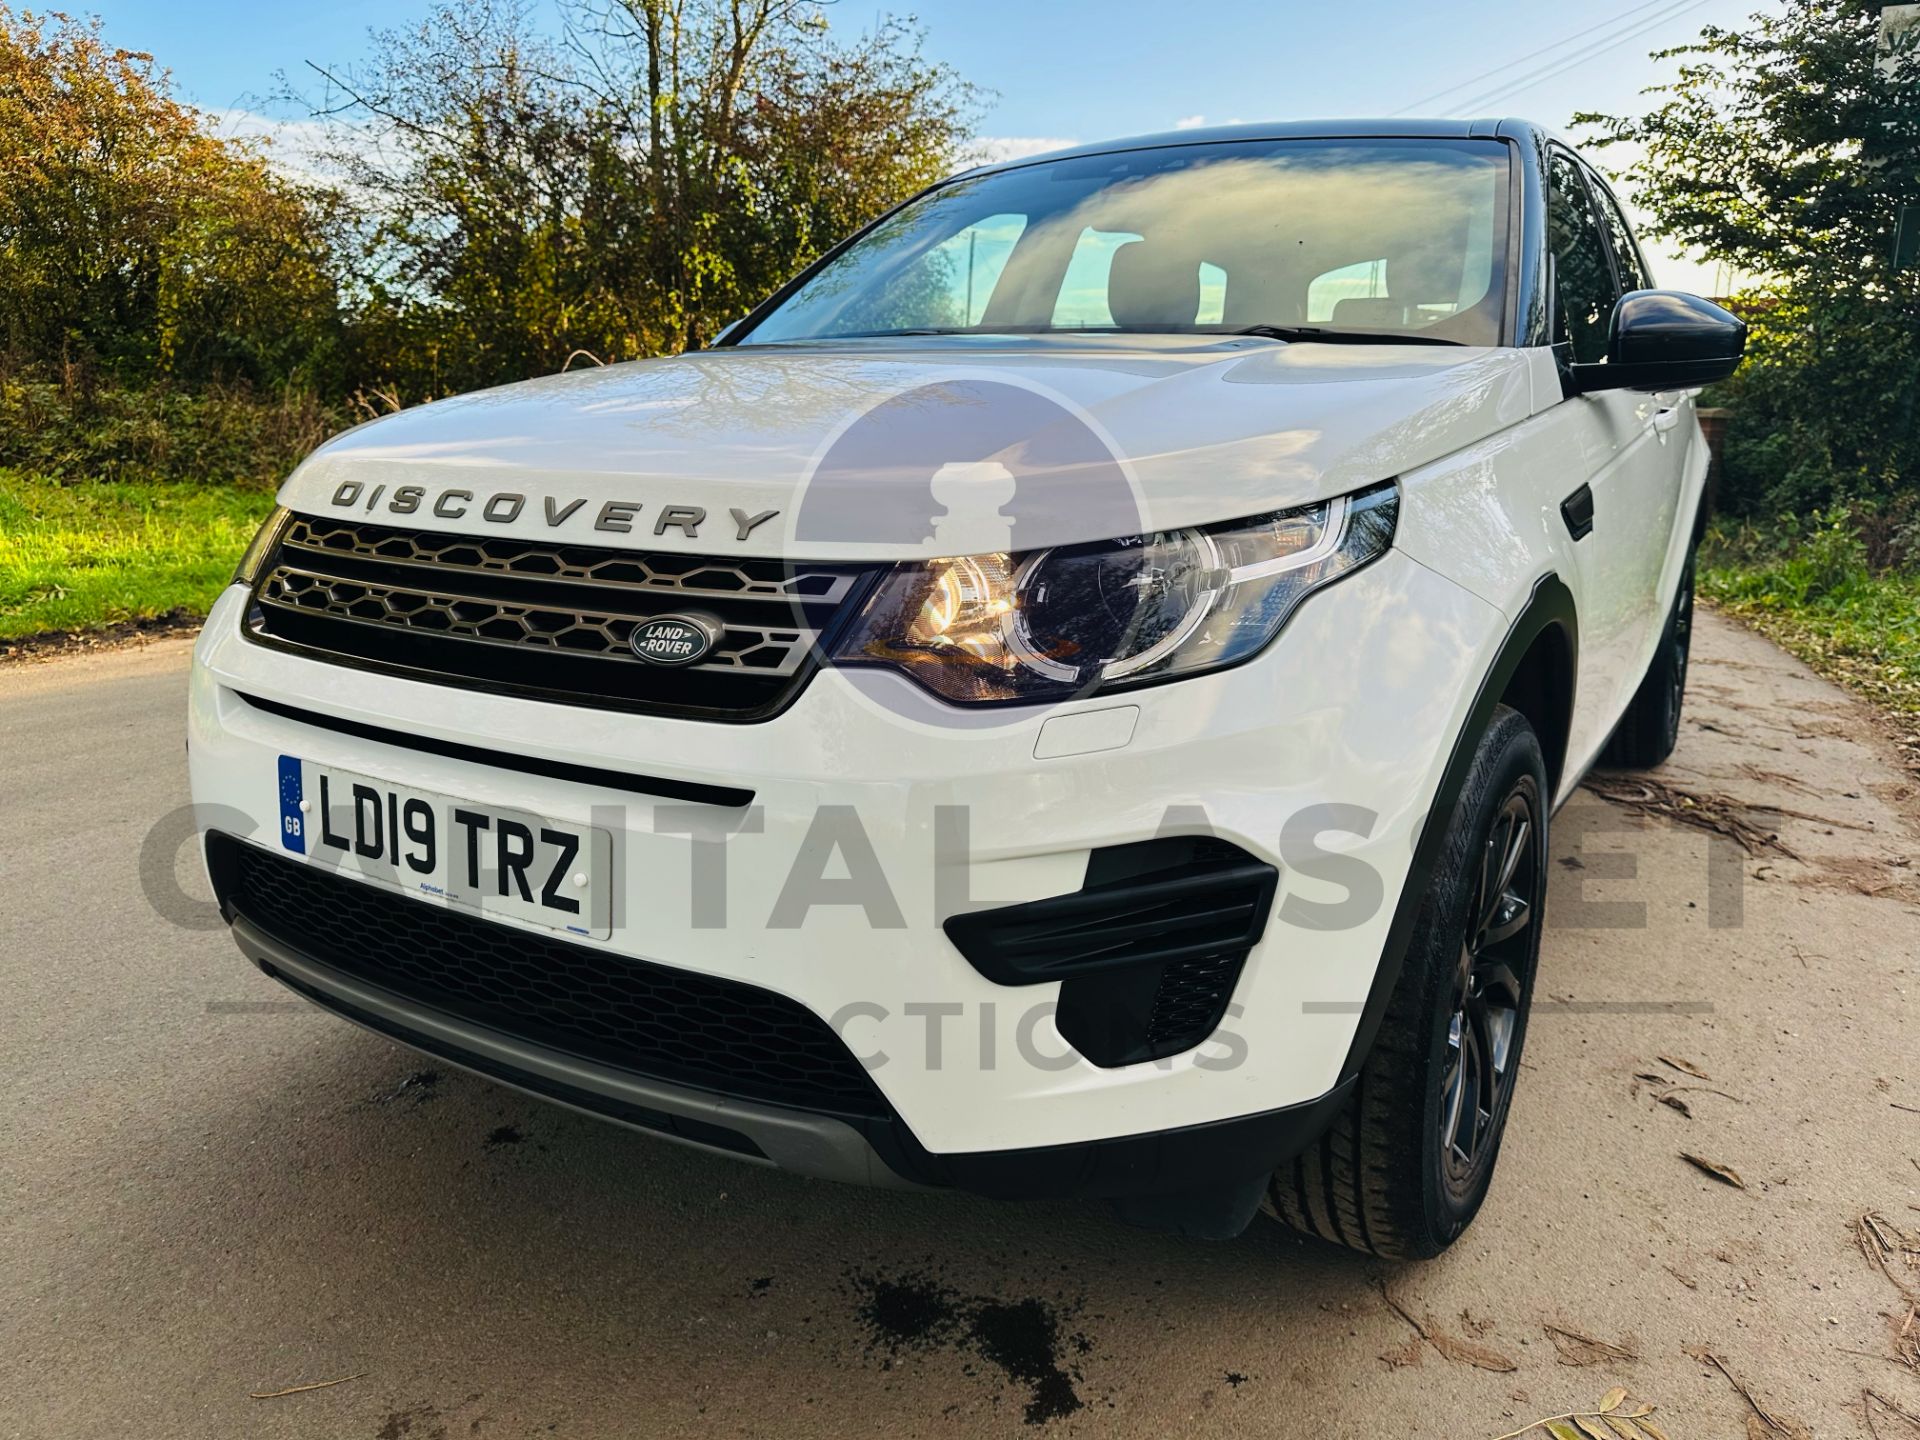 (On Sale) LAND ROVER DISCOVERY SPORT *SE* 5 DOOR SUV (2019 - EURO 6) 2.0 ED4 - AUTO STOP/START - Image 5 of 38